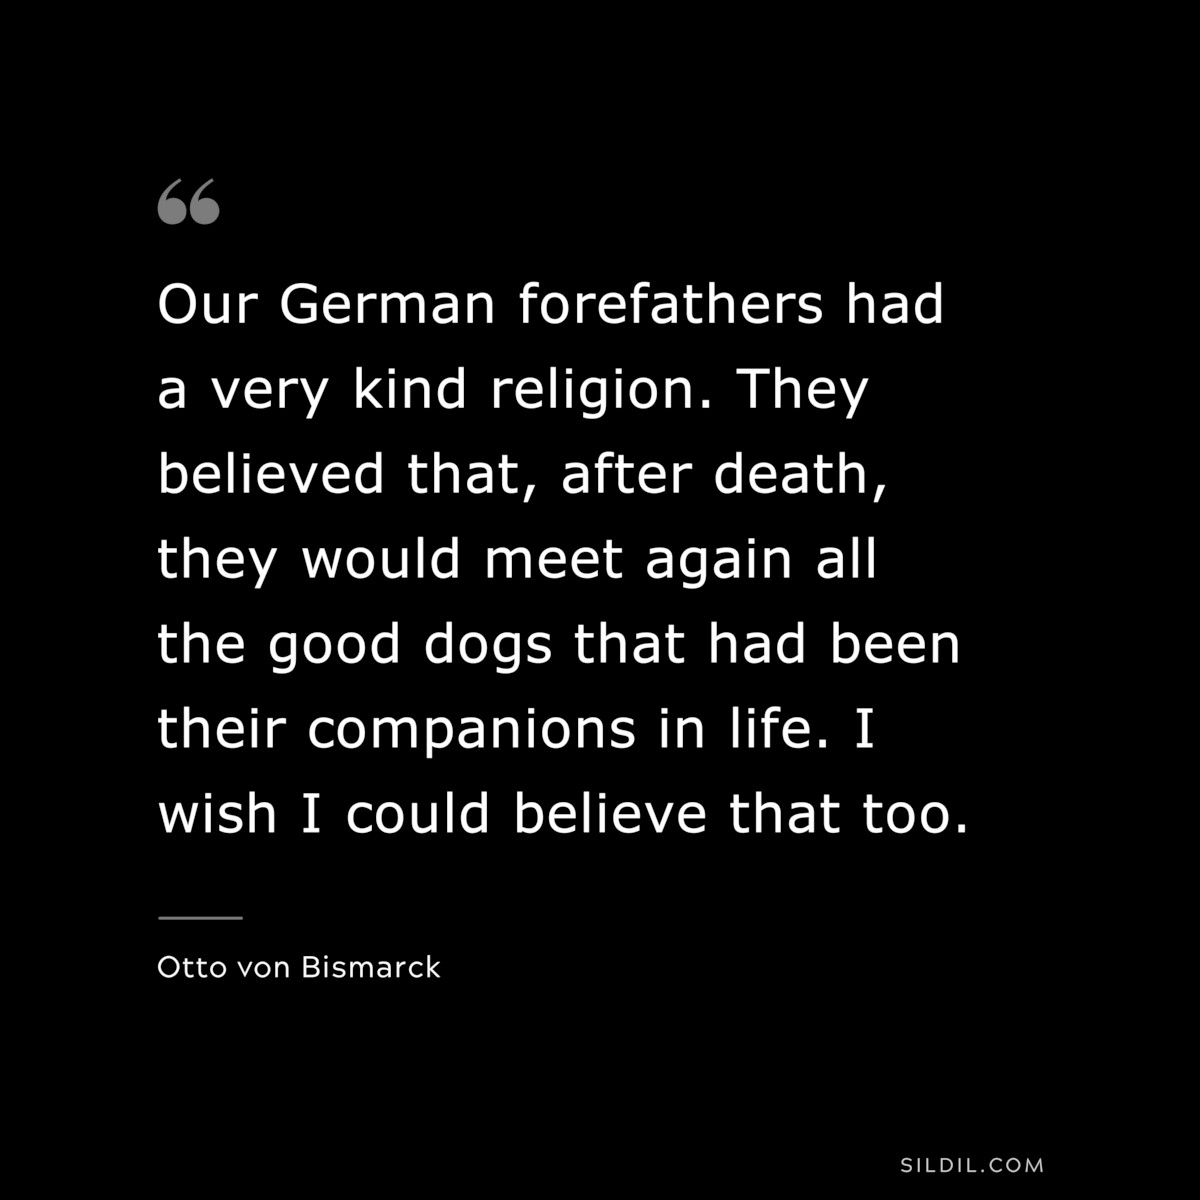 Our German forefathers had a very kind religion. They believed that, after death, they would meet again all the good dogs that had been their companions in life. I wish I could believe that too. ― Otto von Bismarck